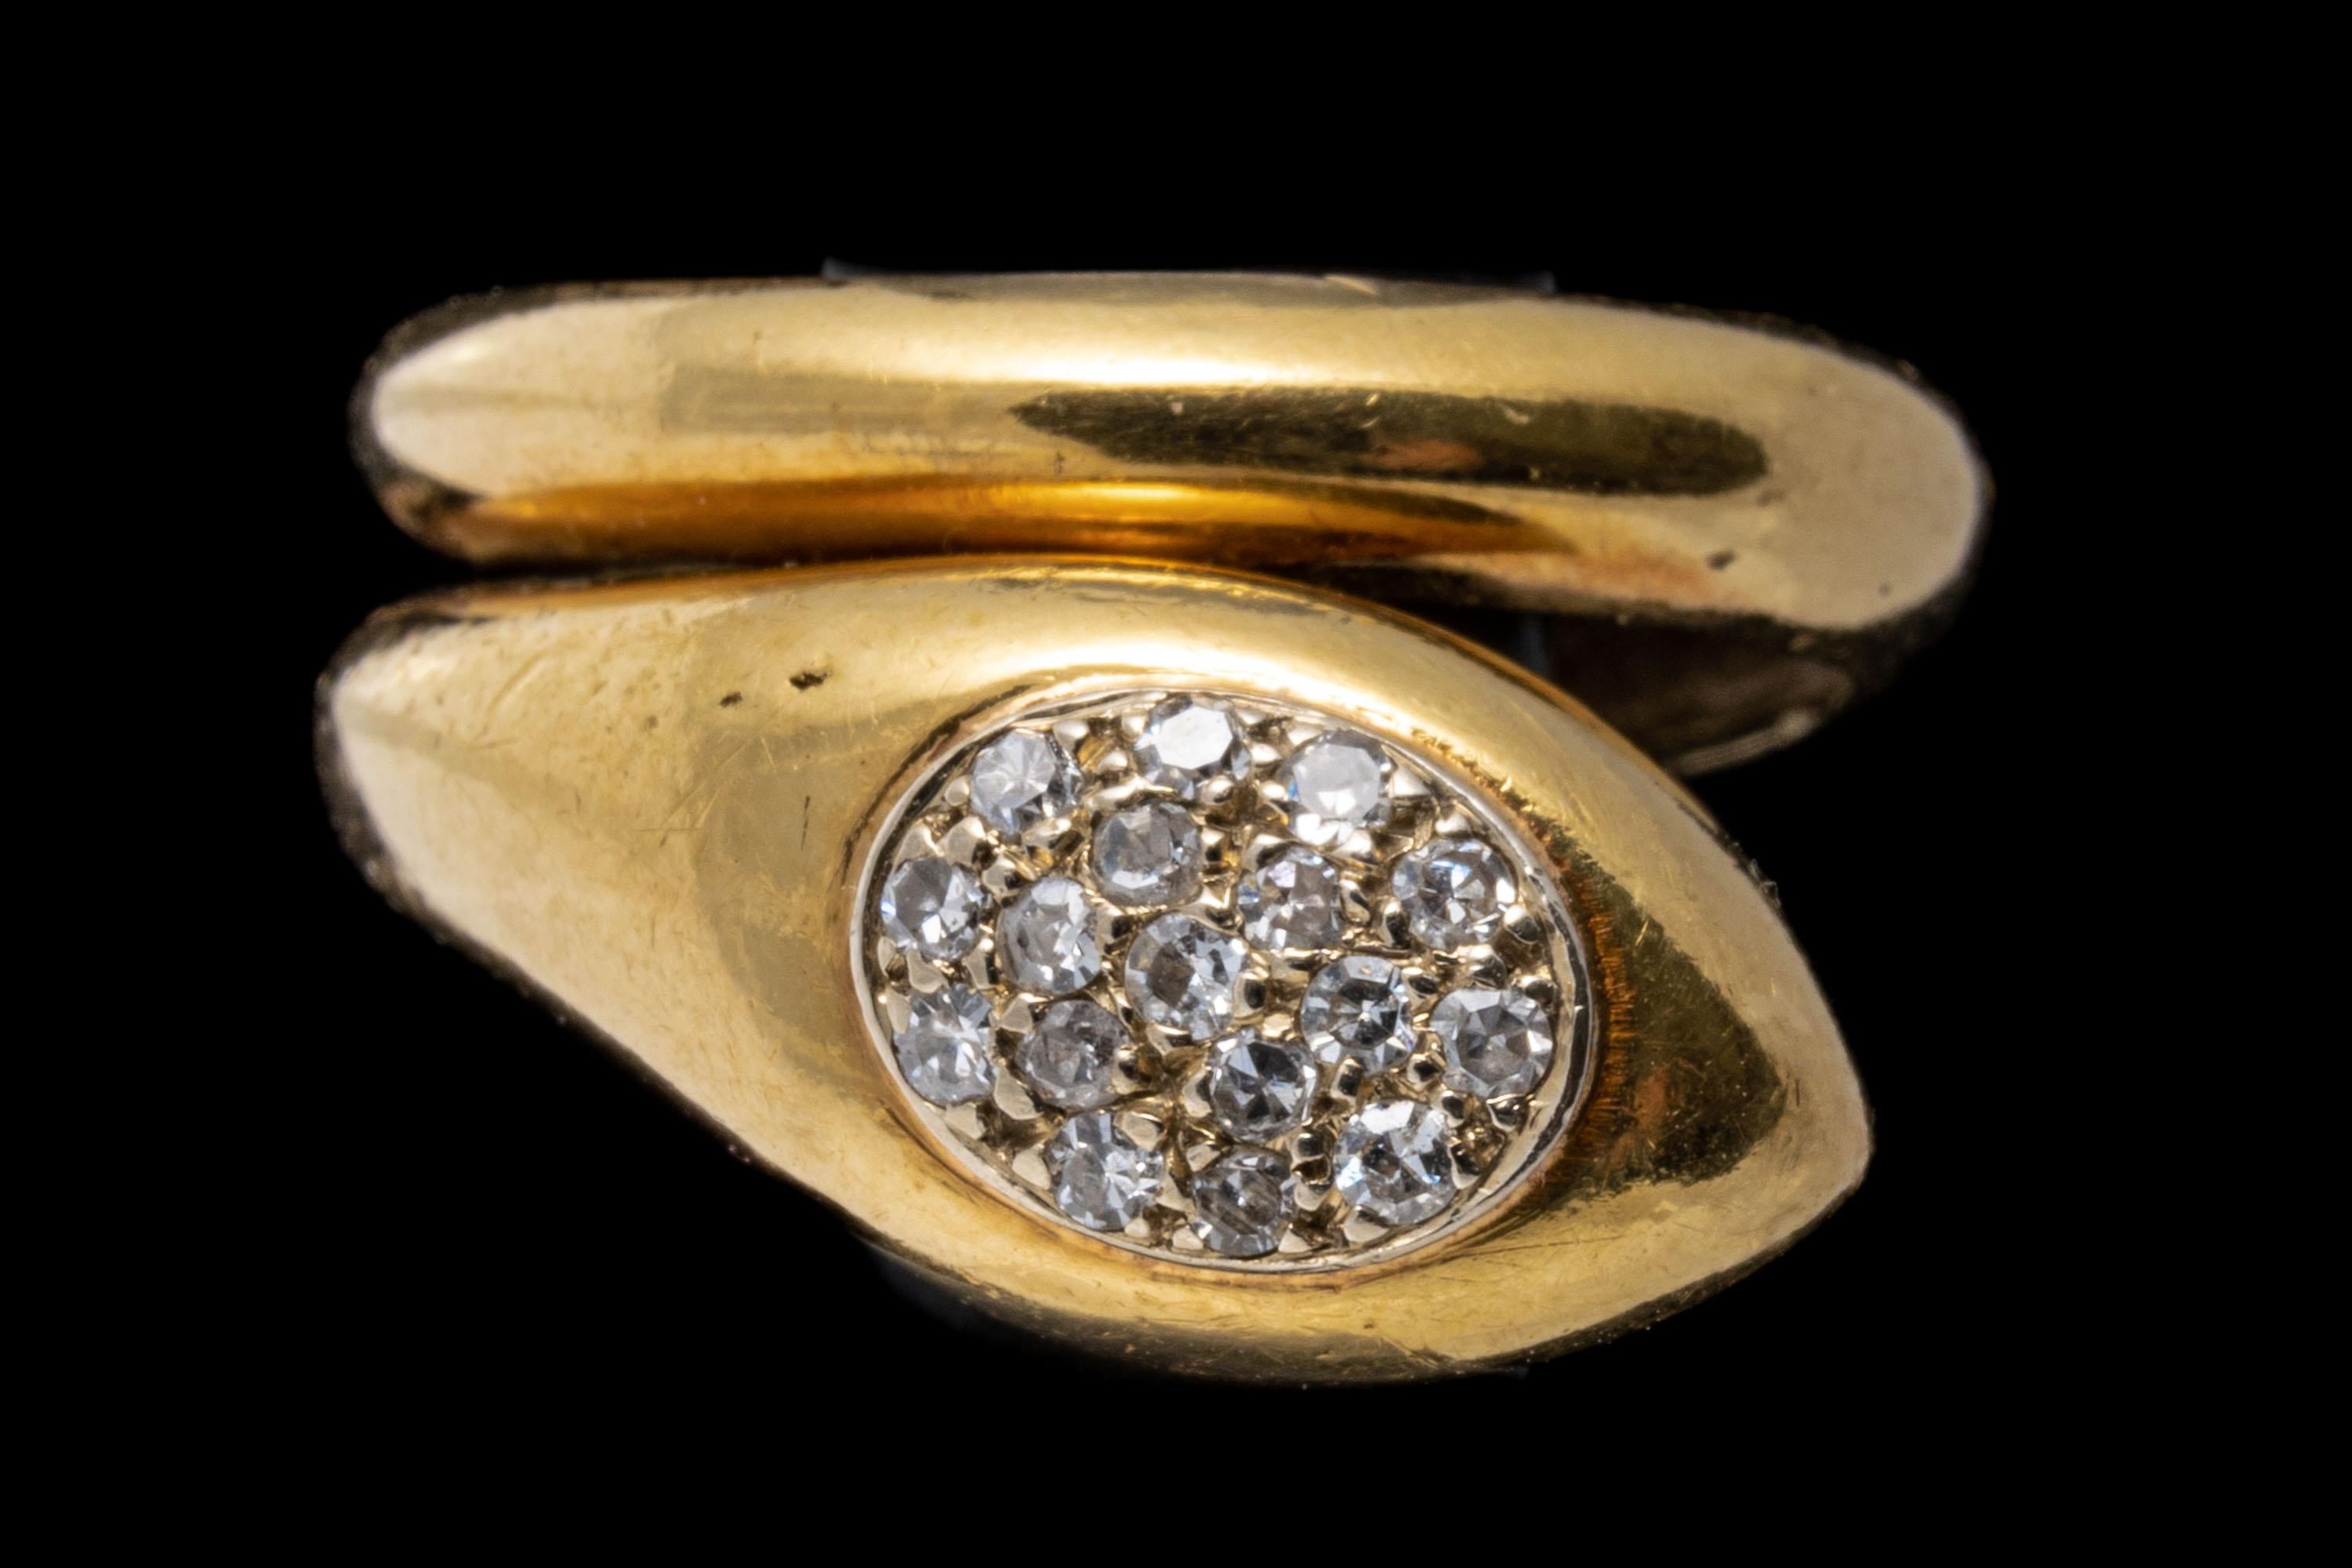 14k yellow gold ring. This contemporary ring is a coiled snake motif with a high polished body, wound into a single coil and finished with an oval cluster of pave set, round faceted diamonds, set into the top of the head, approximately 0.08